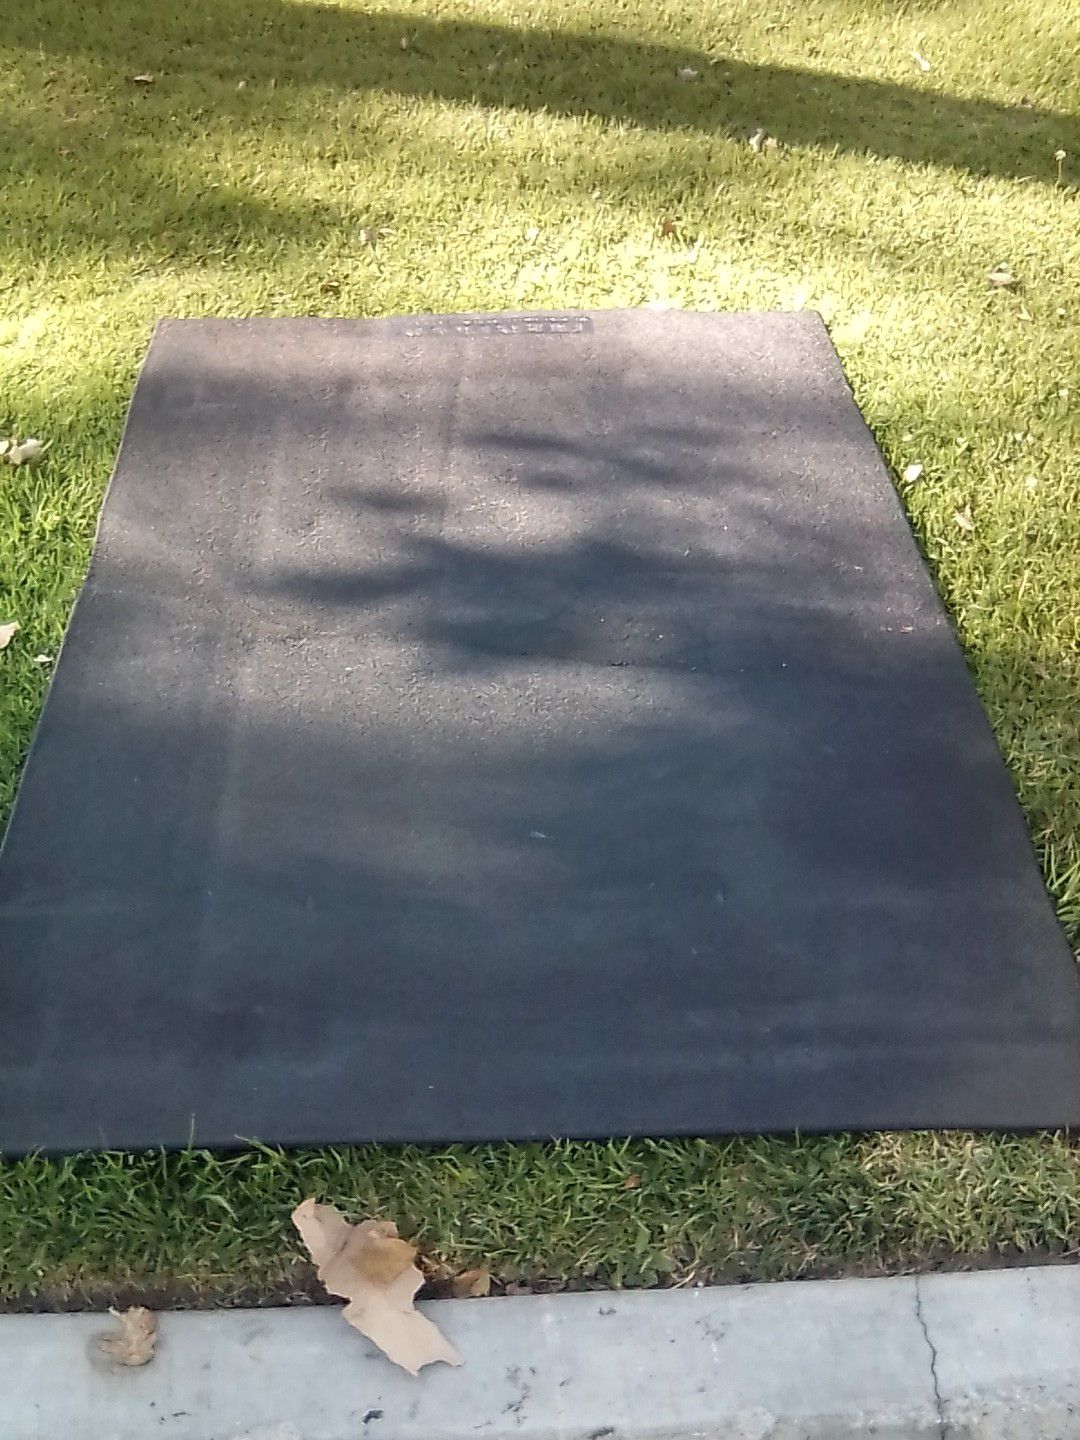 Rubber mat by busy body